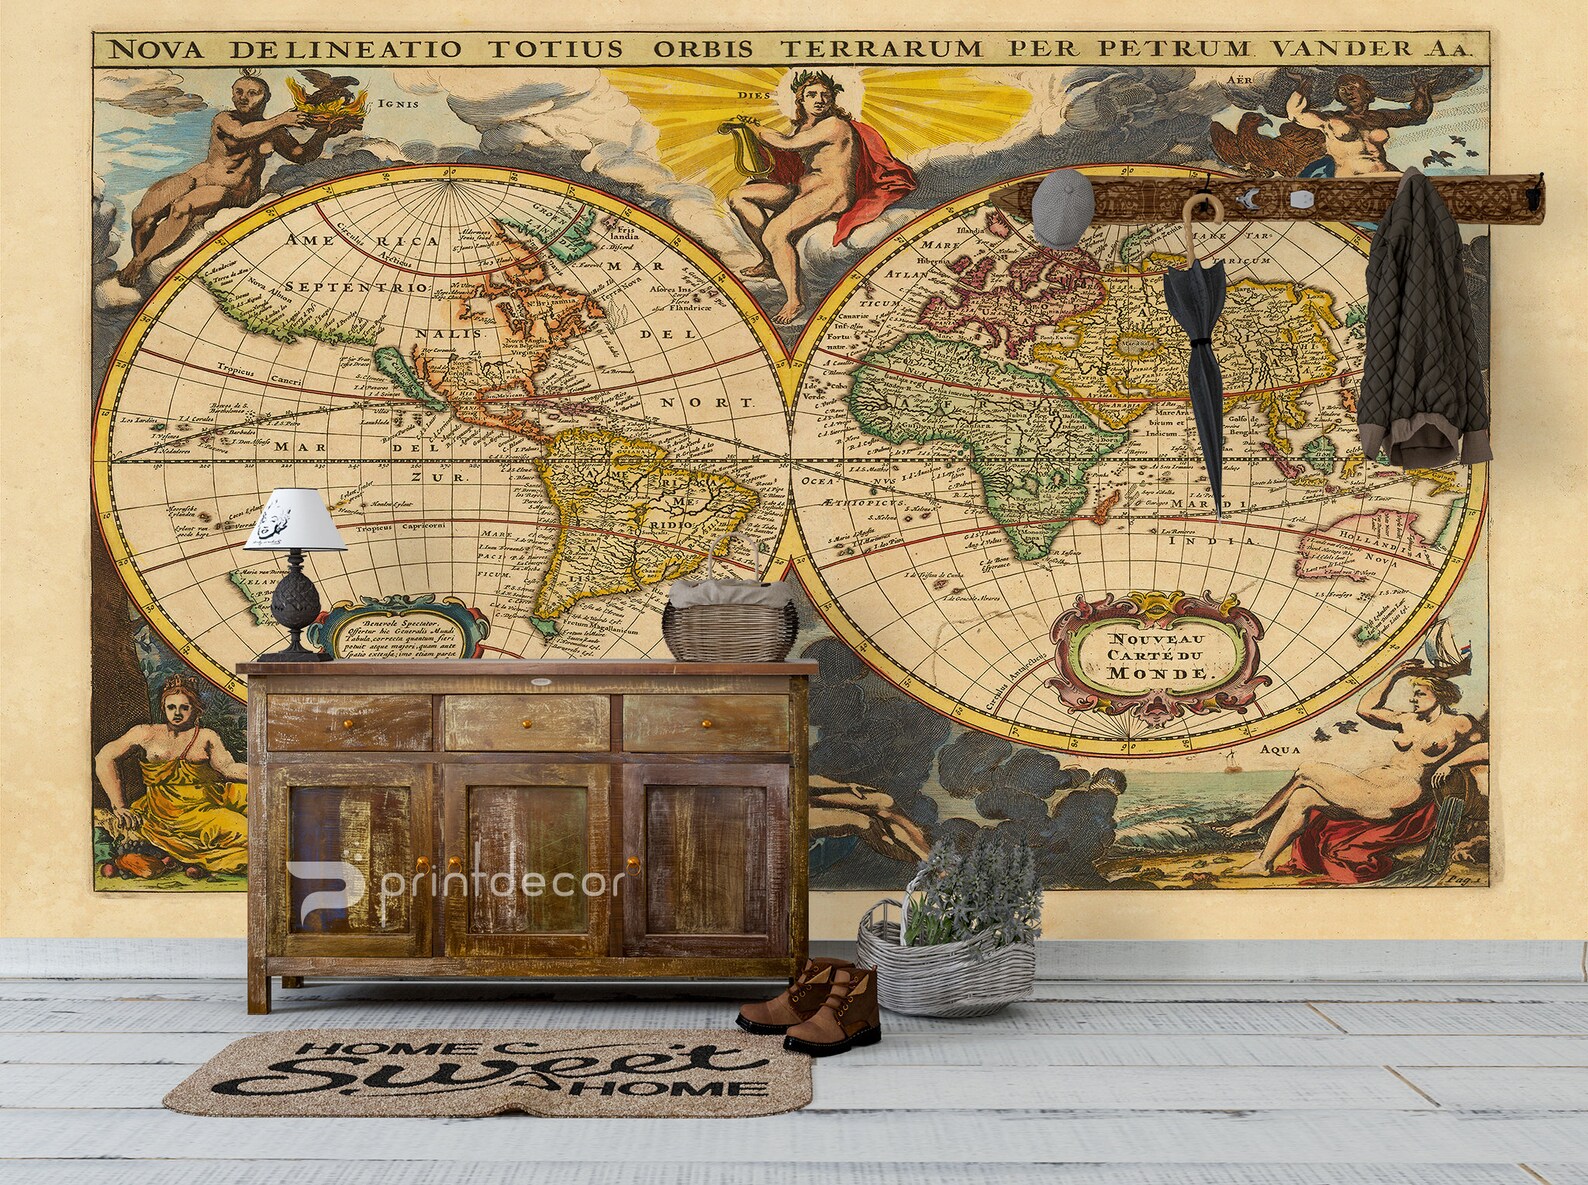 Old World Map Wall Mural Vintage World Map Wallpaper Etsy